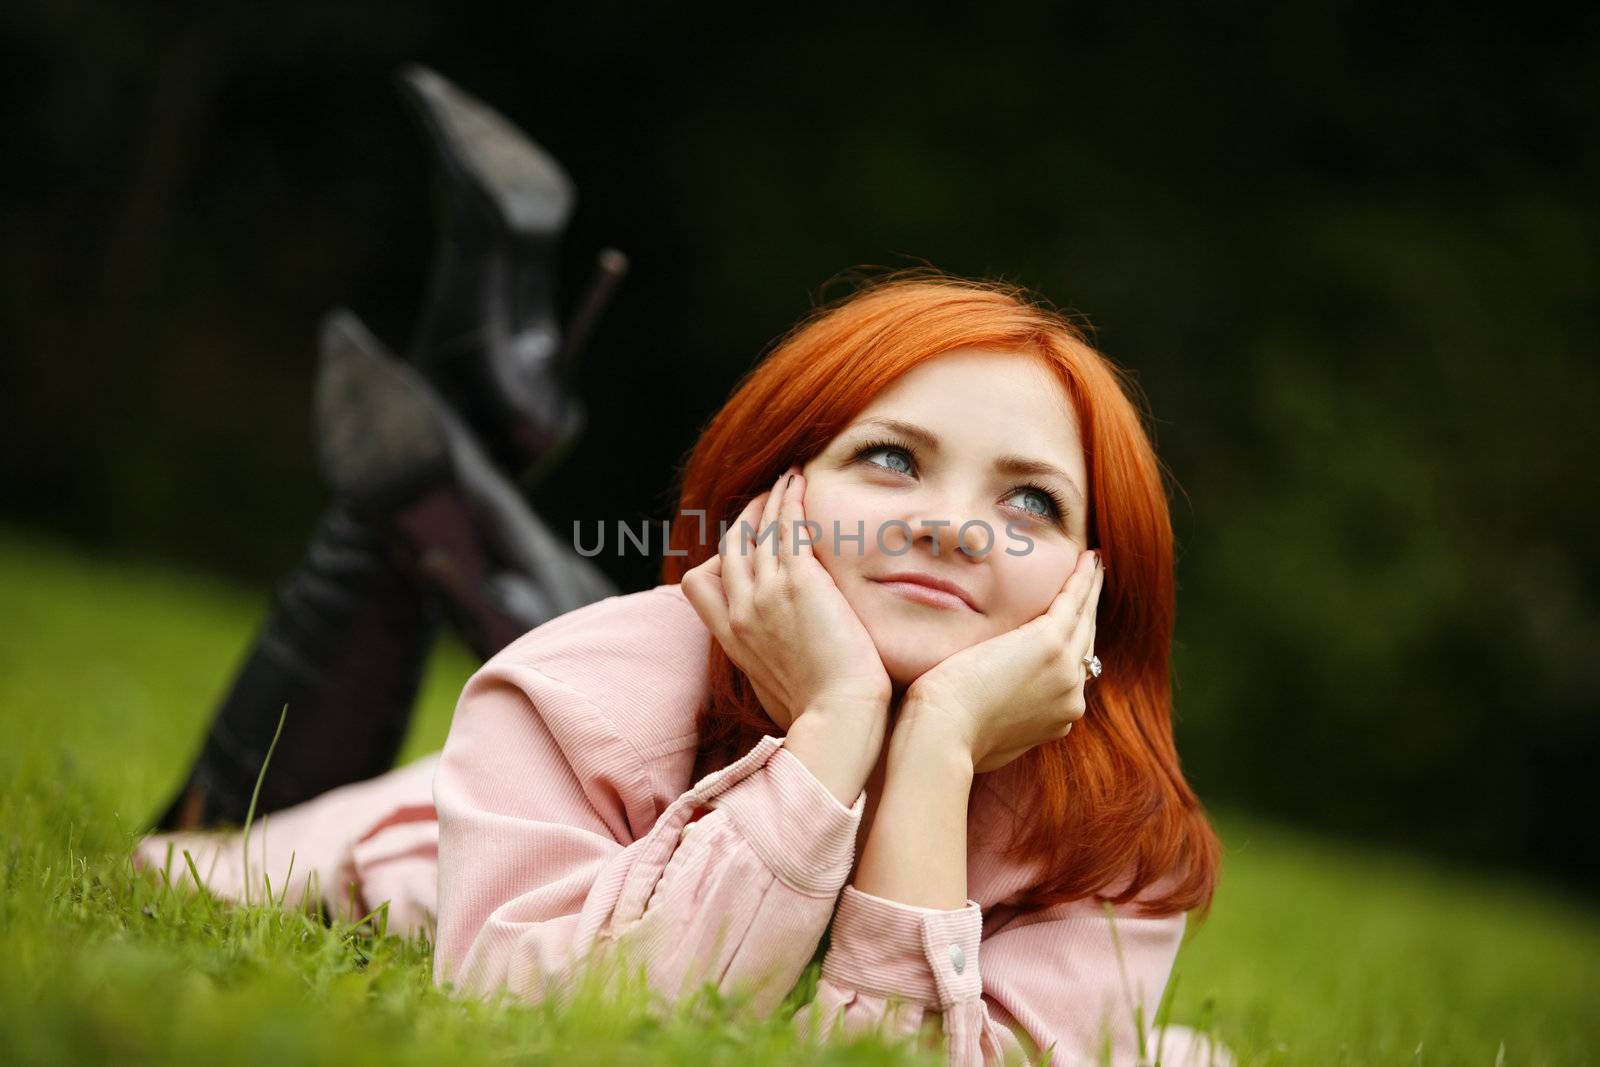 Portrait of the girl with red hair in a grass